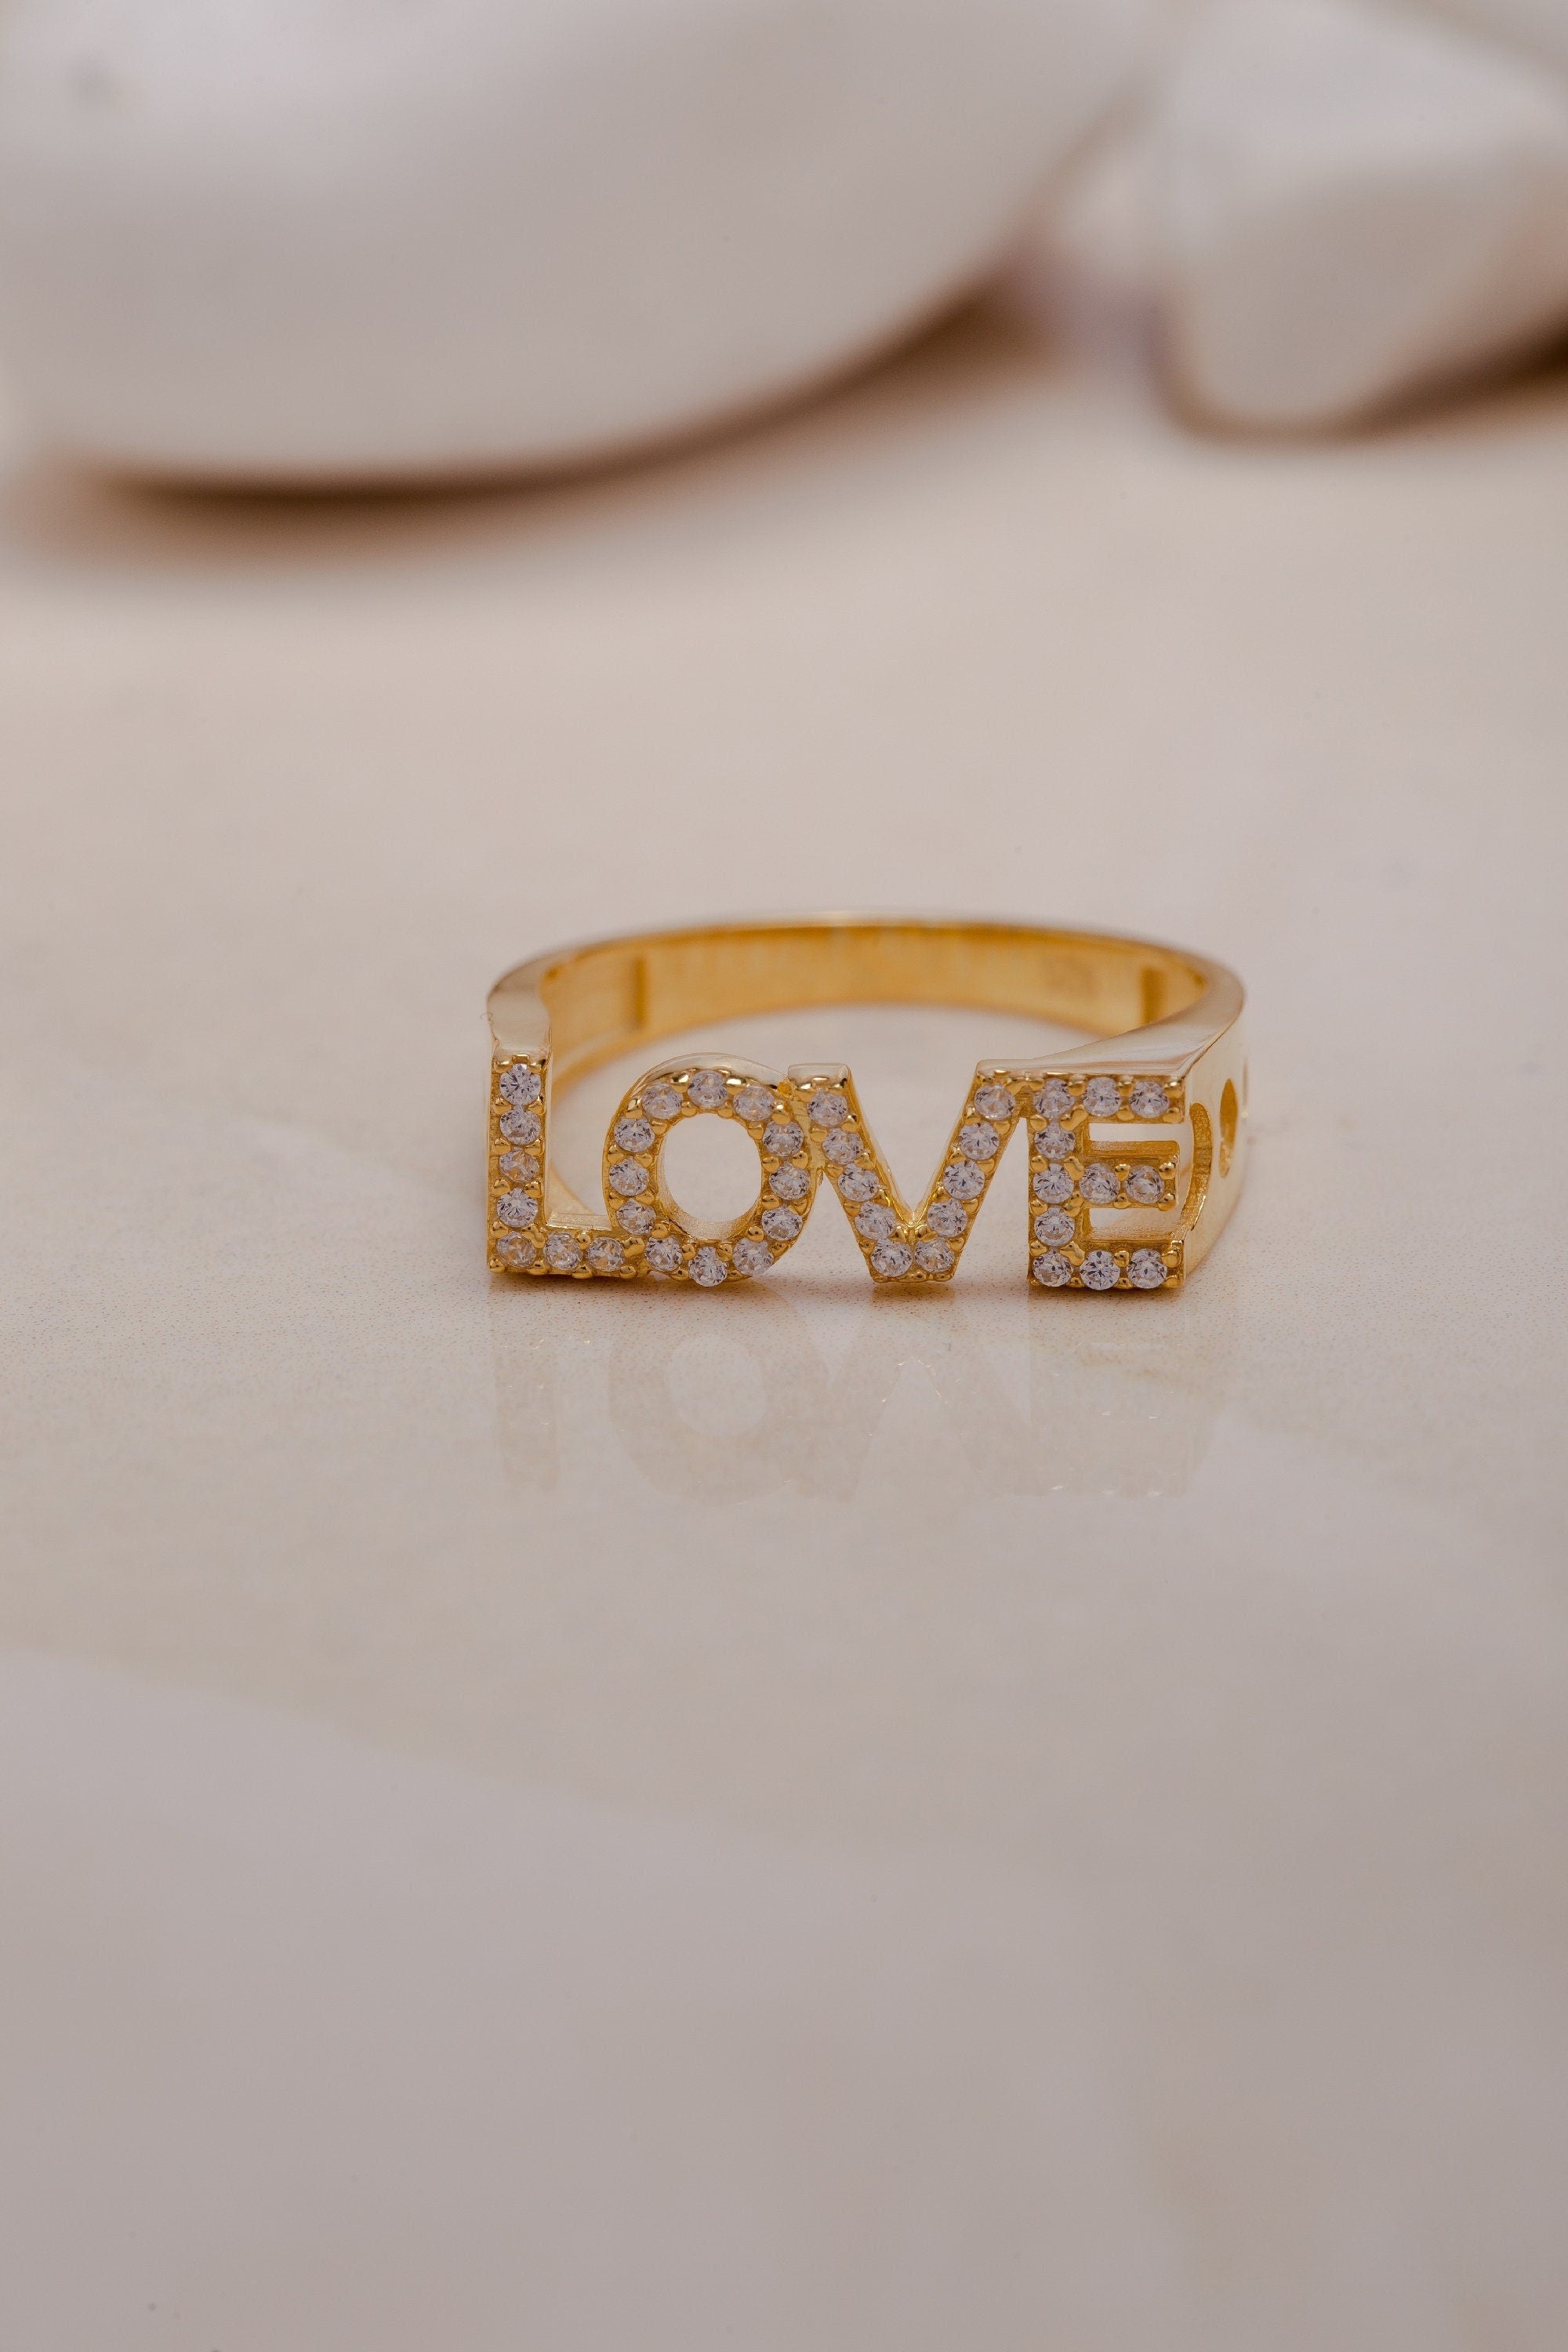 14K Solid Love Word Ring, 925 Silver Delicate Love Ring, Dainty Gold Ring, Gift, Gift For Mother Day, Mother Day Jewelry, Gift for Her